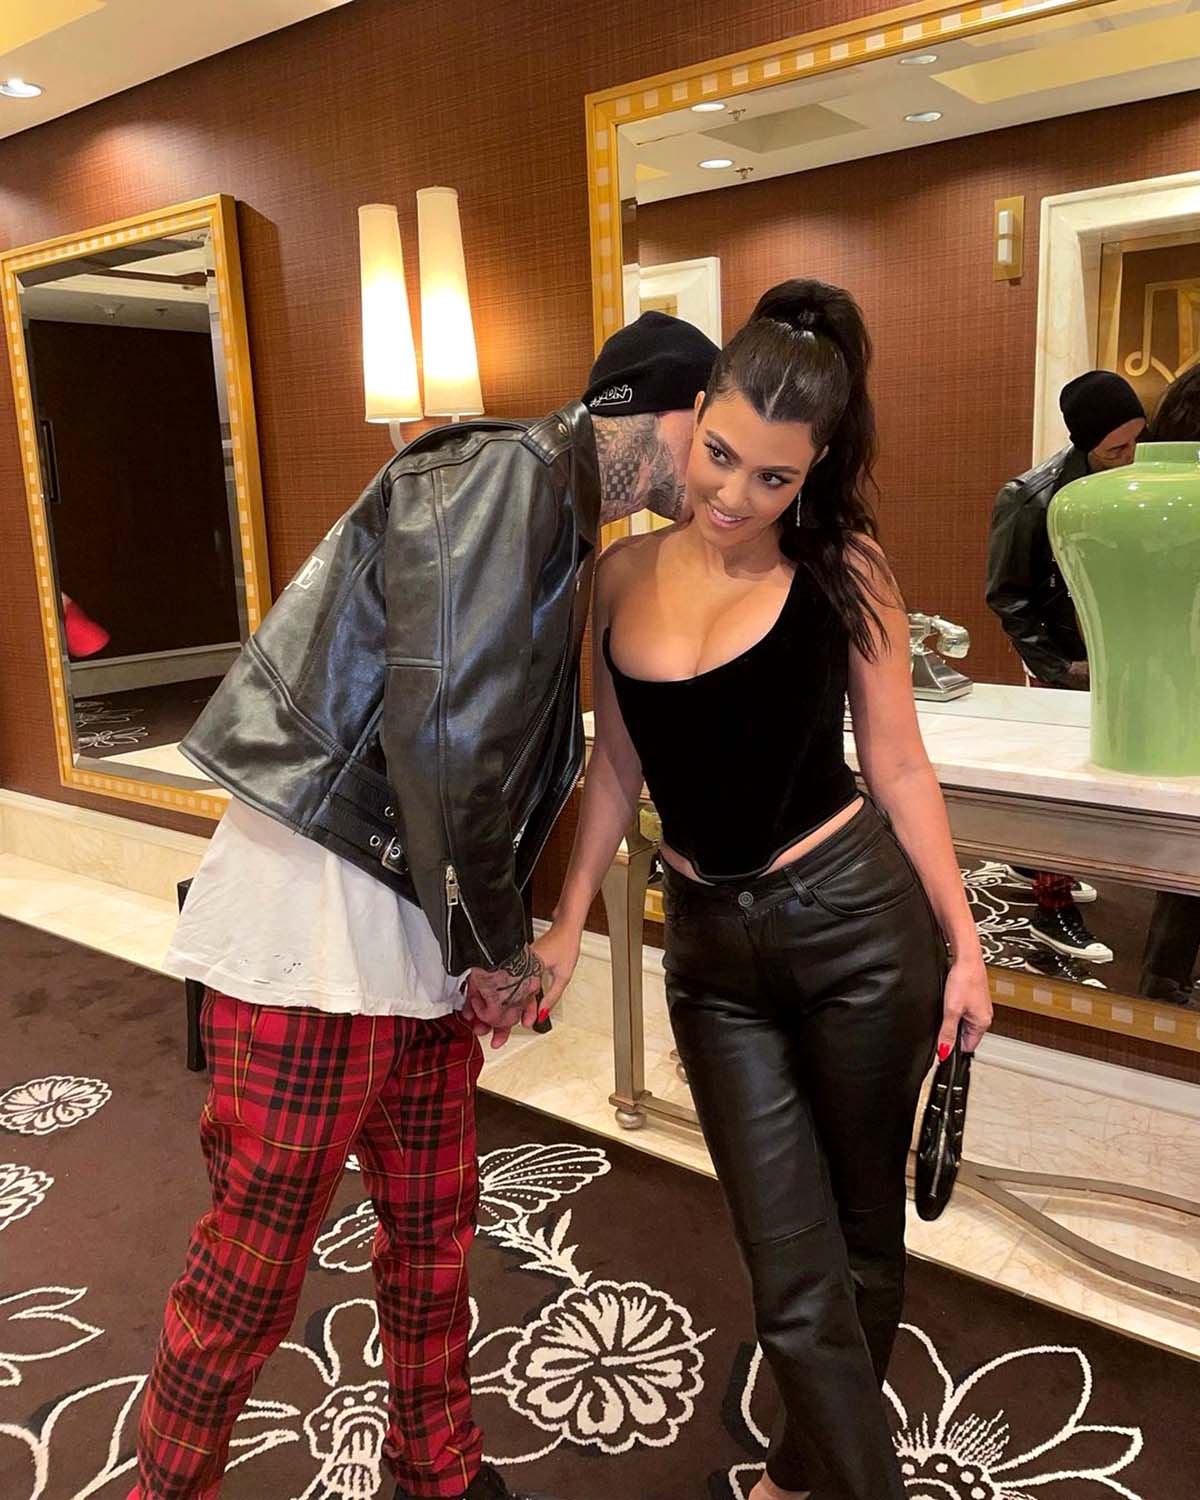 Kourtney Kardashian rocks low neck top paired with black leather pants on  day out in LA - Photos,Images,Gallery - 68447